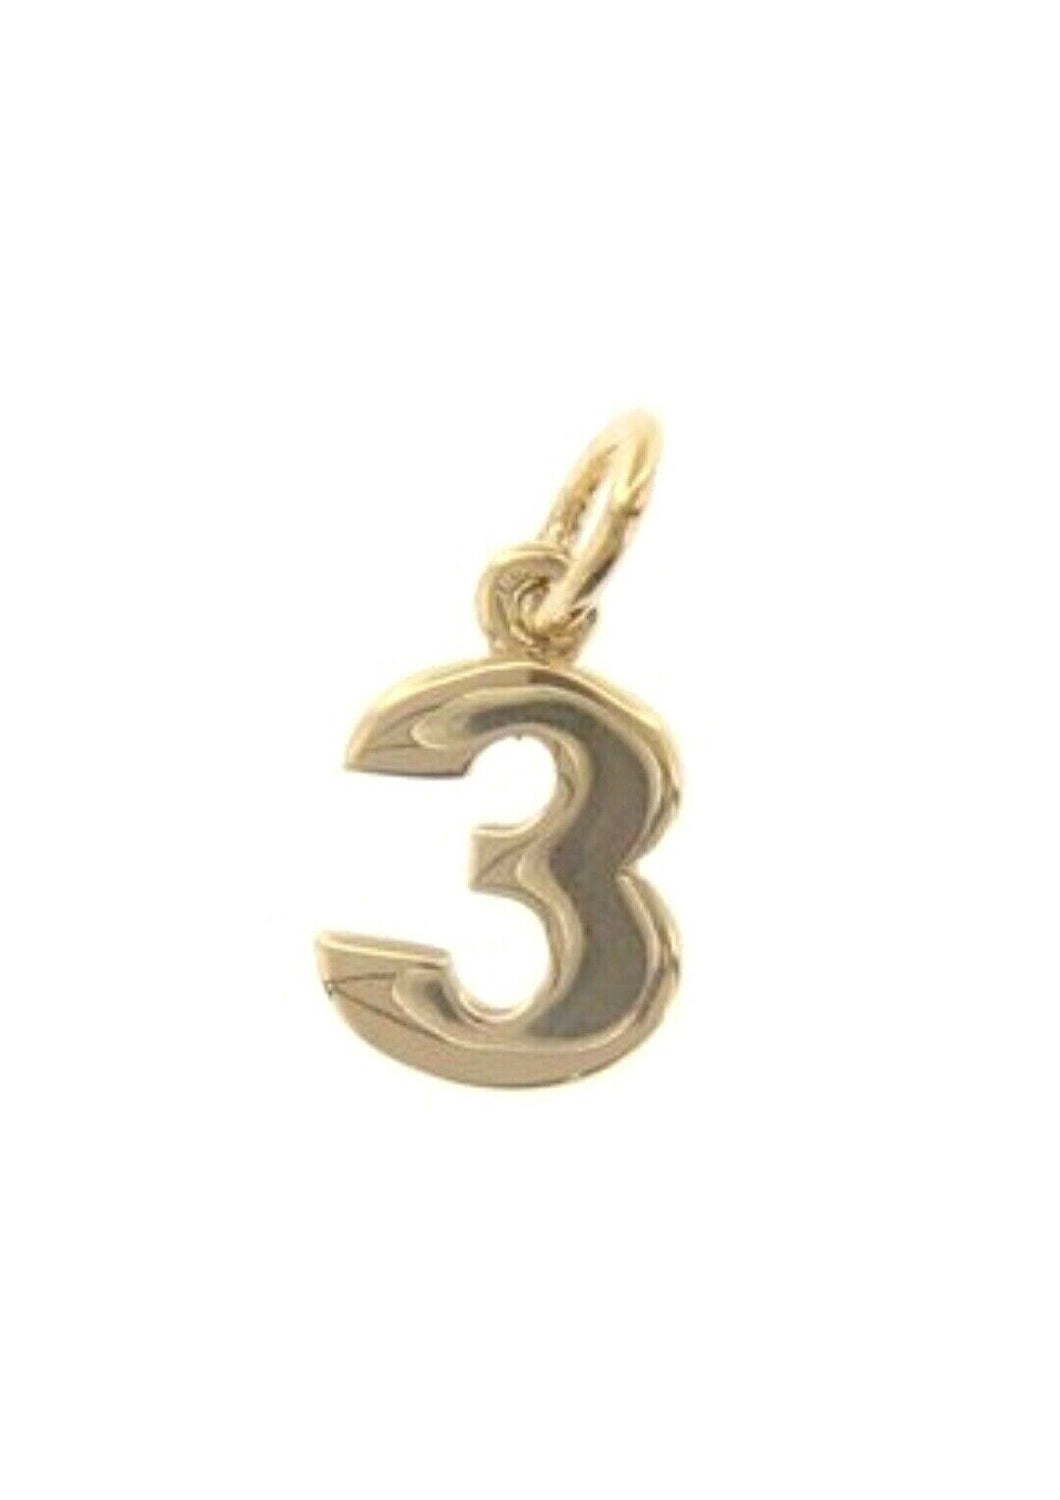 18k yellow gold number 3 three small pendant charm, 0.4